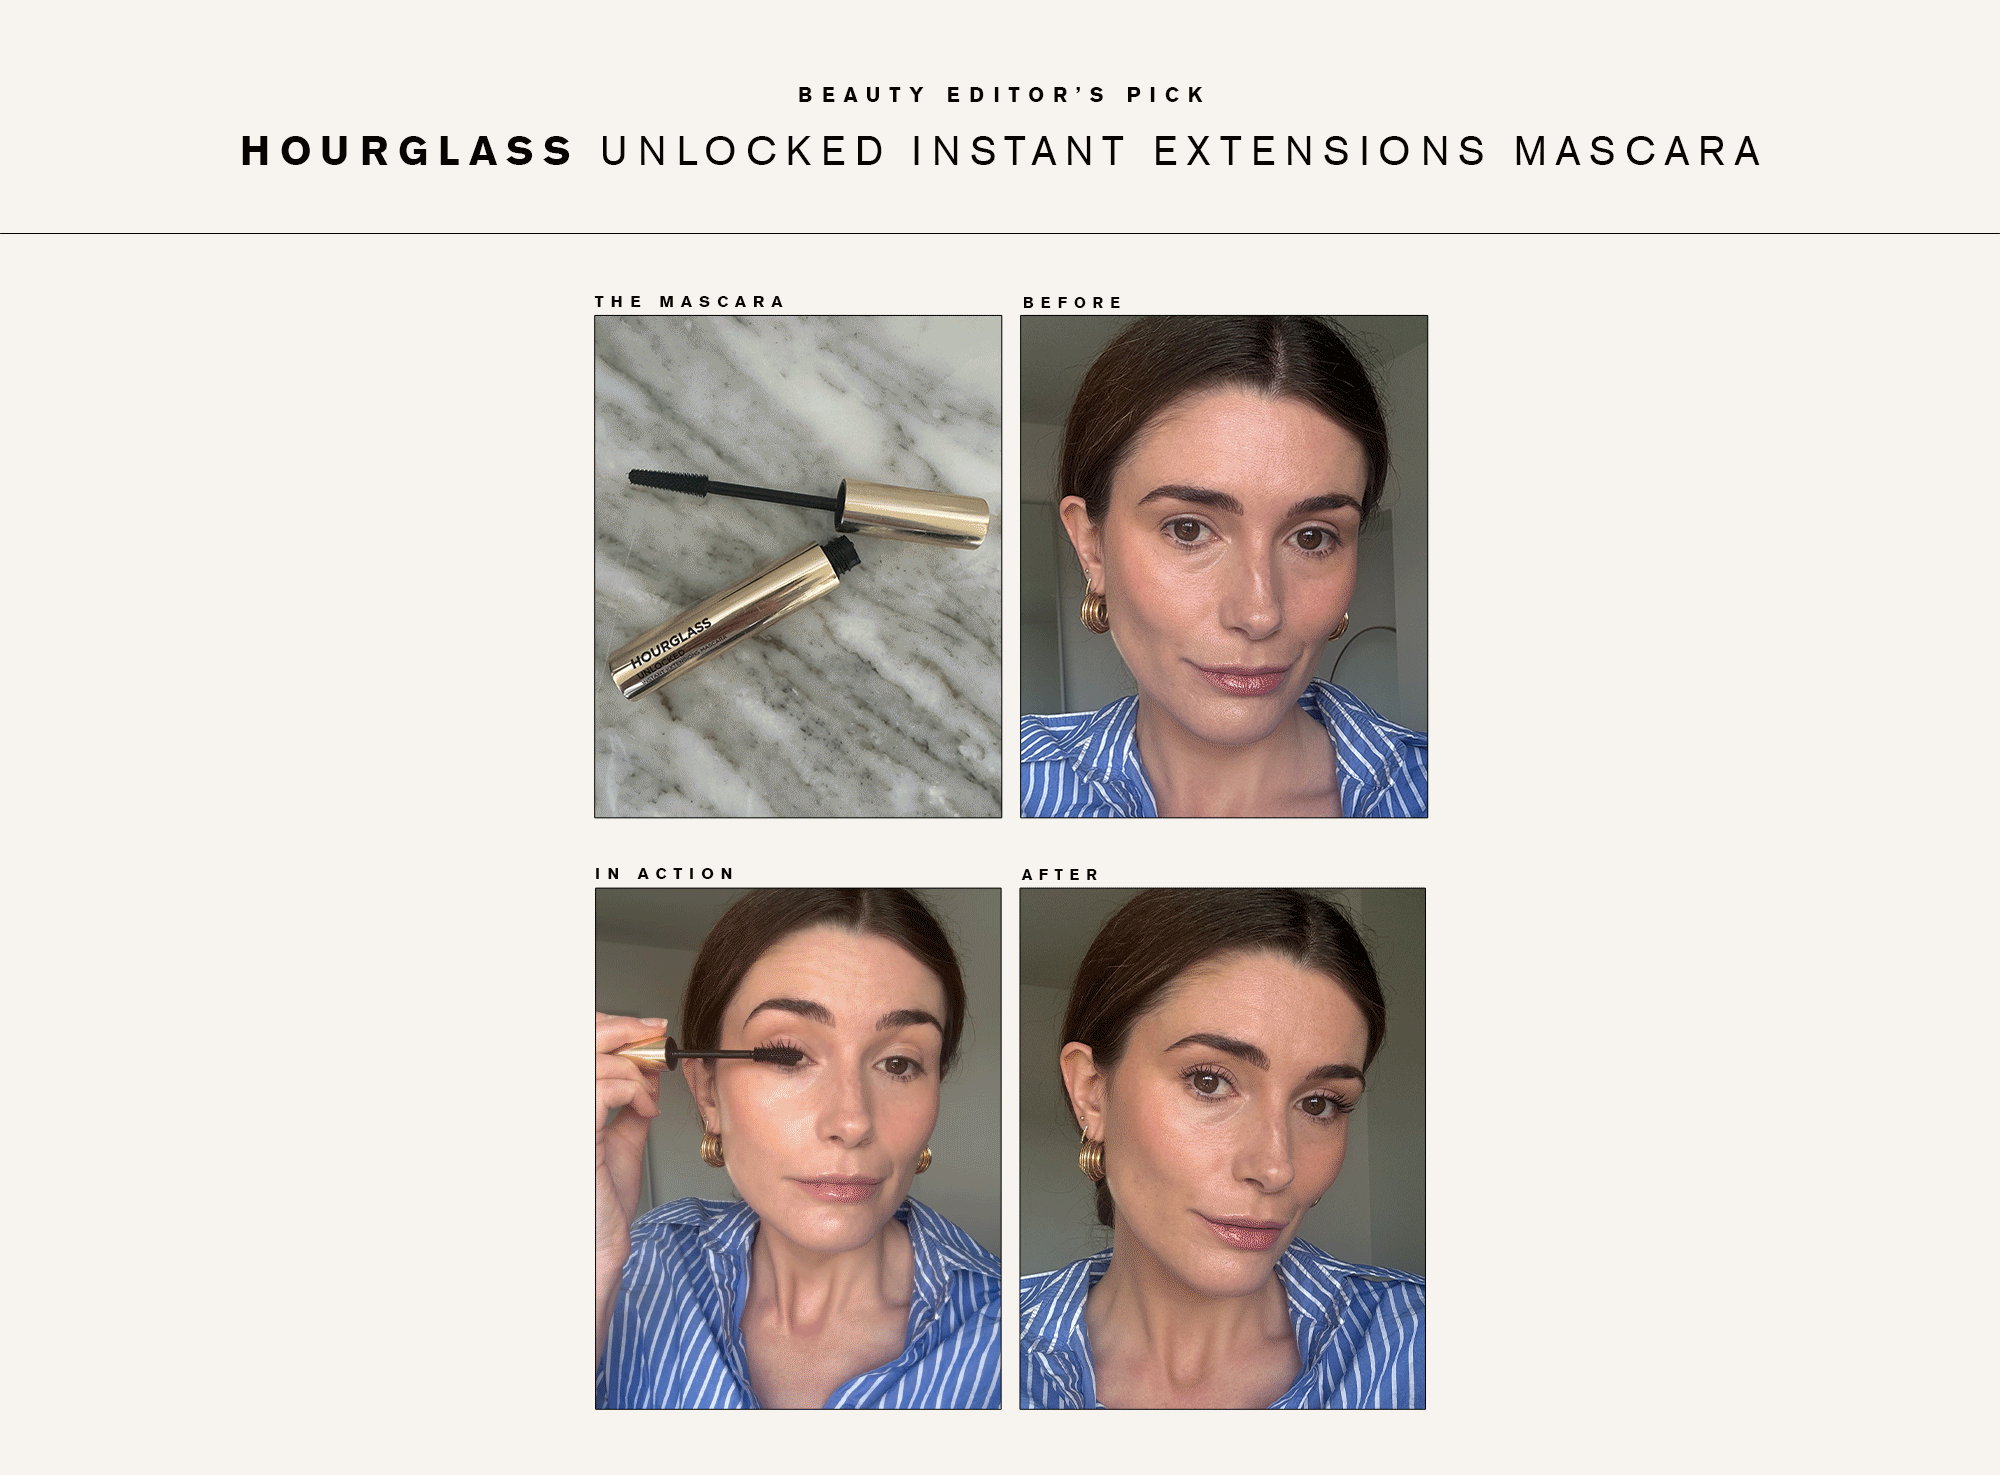 Beauty editor Eleanor testing the Hourglass Unlocked Instant Extensions Mascara